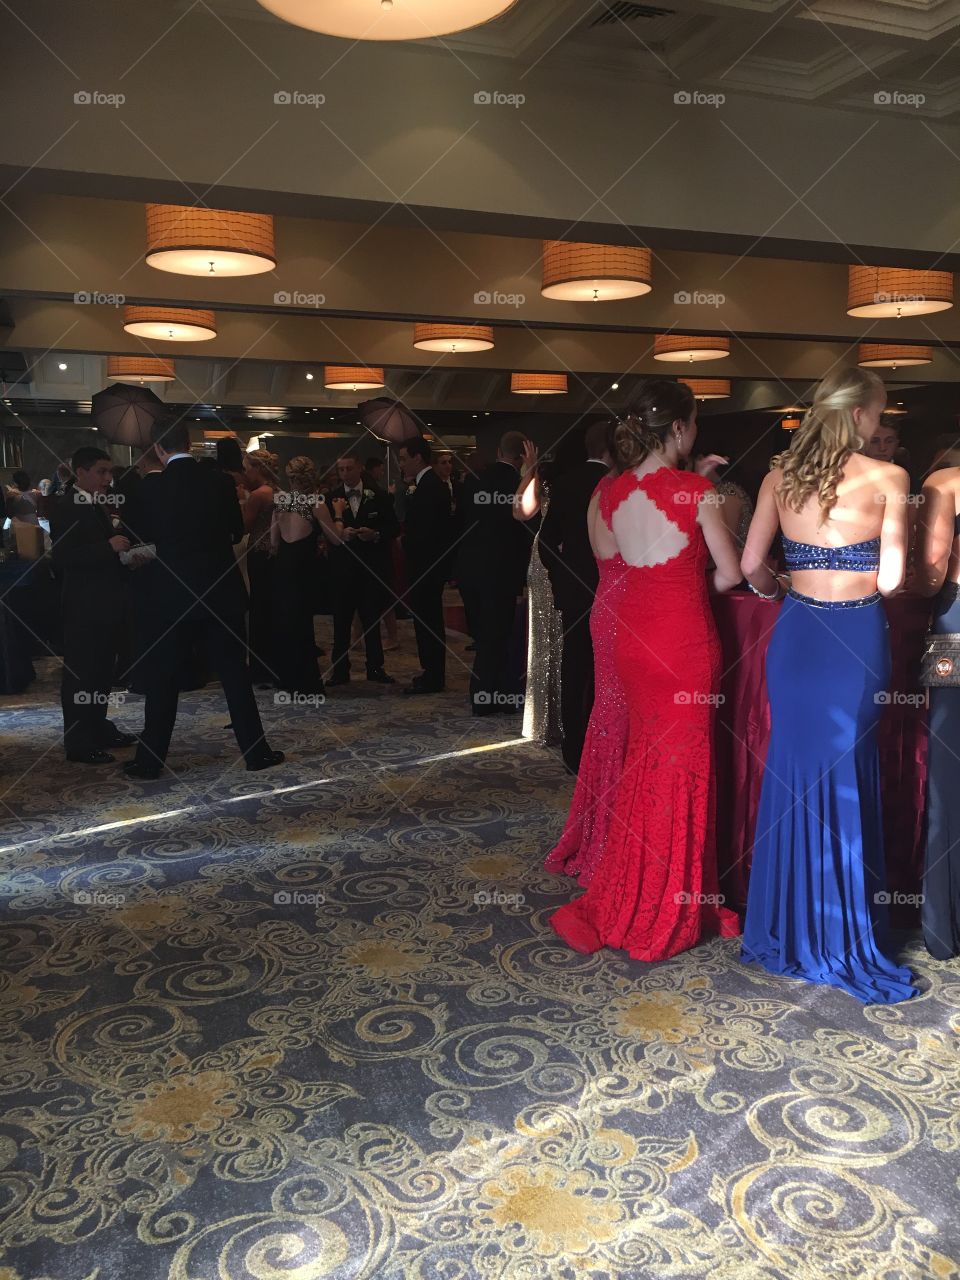 View inside prom